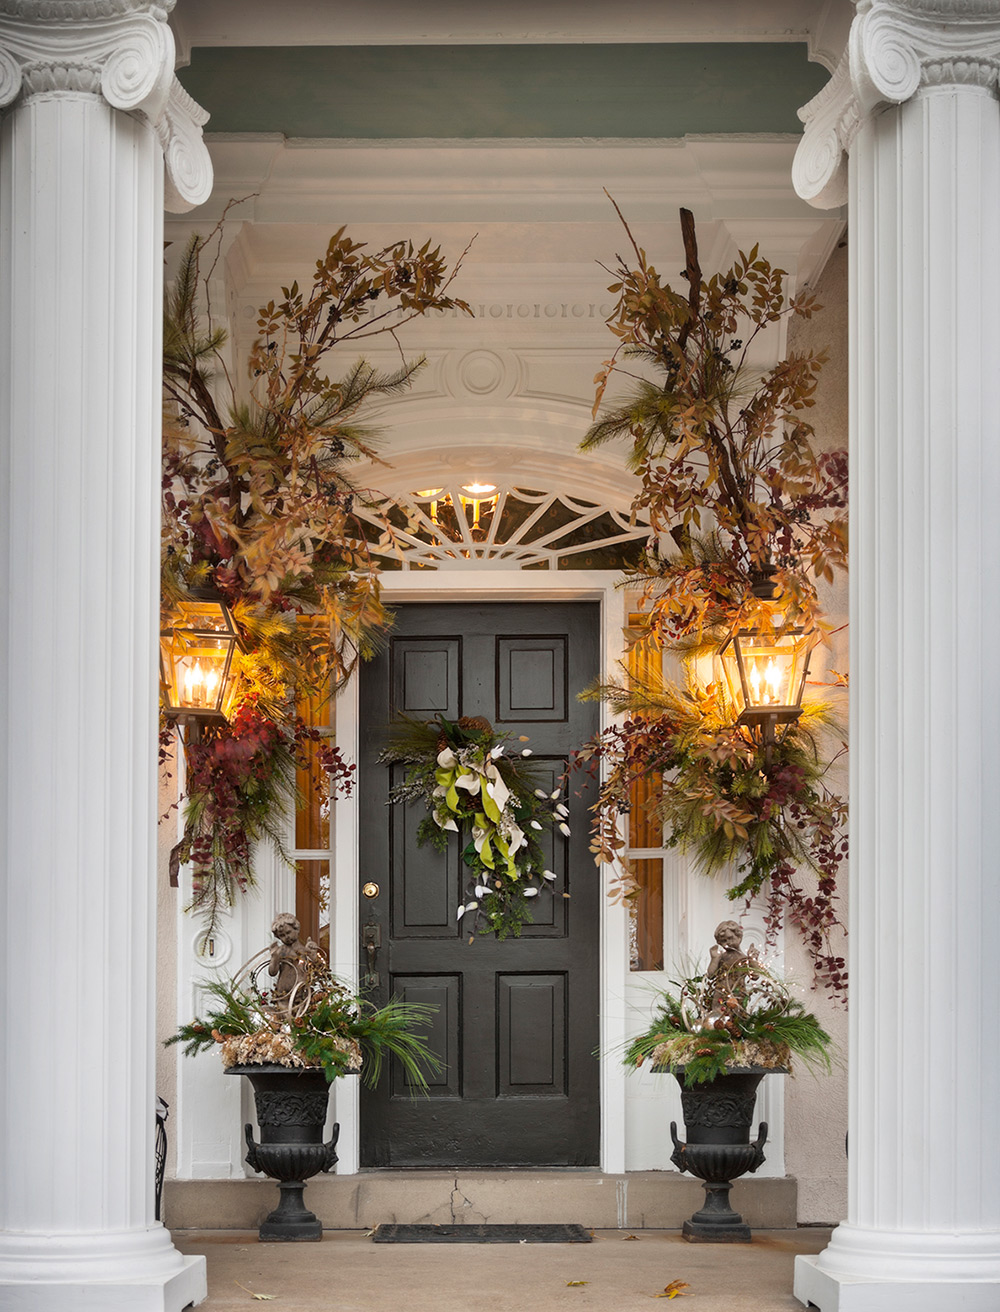 Merry Adornment for Your Door - Nell Hill's